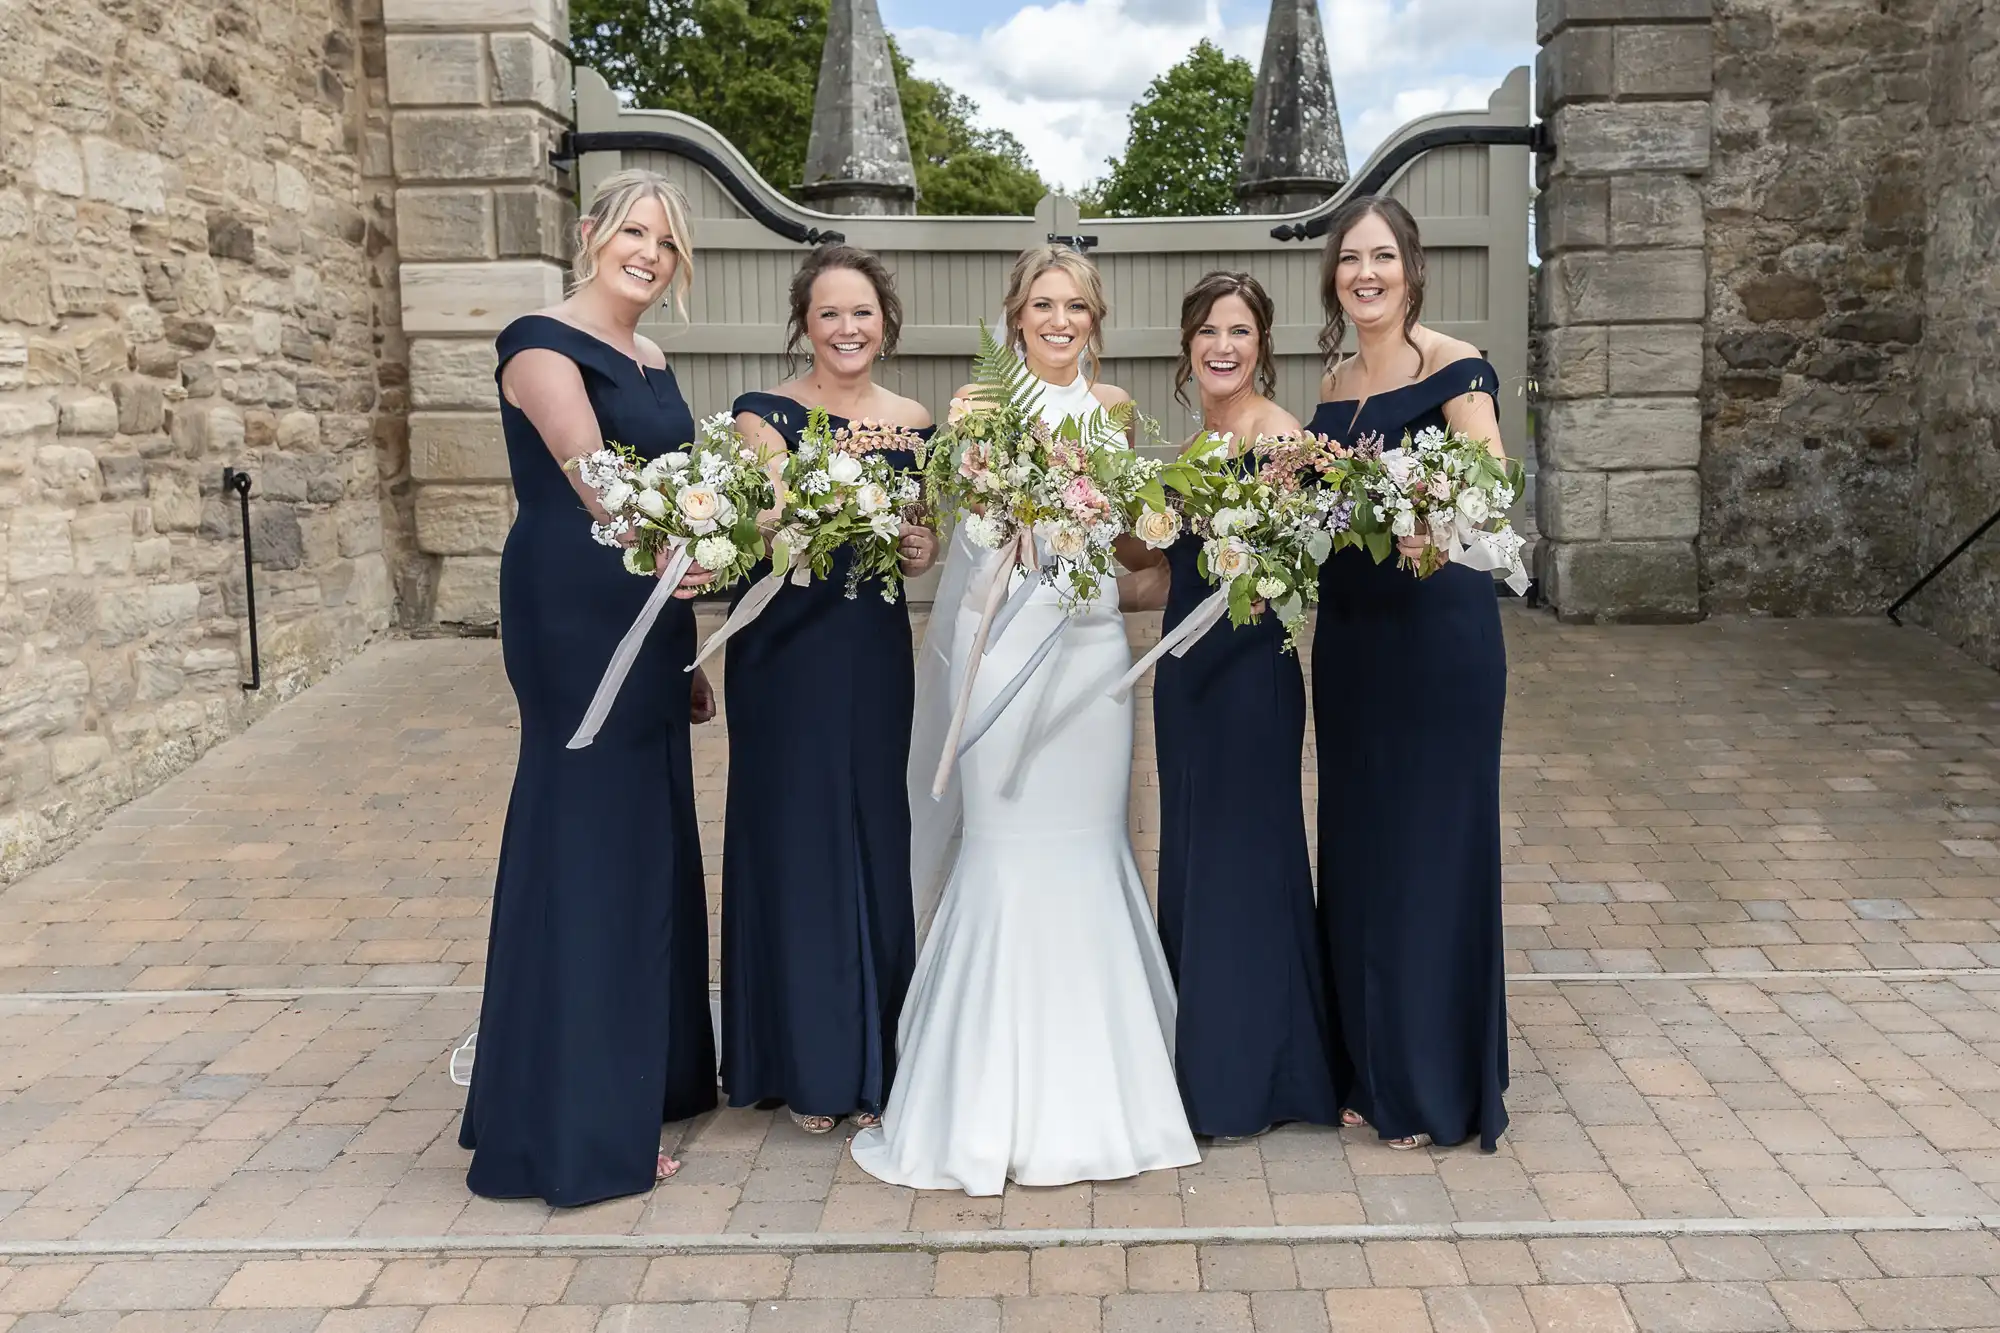 Five women in formal wear posing with bouquets at a wedding, with the bride in a white dress, flanked by four bridesmaids in navy blue dresses.